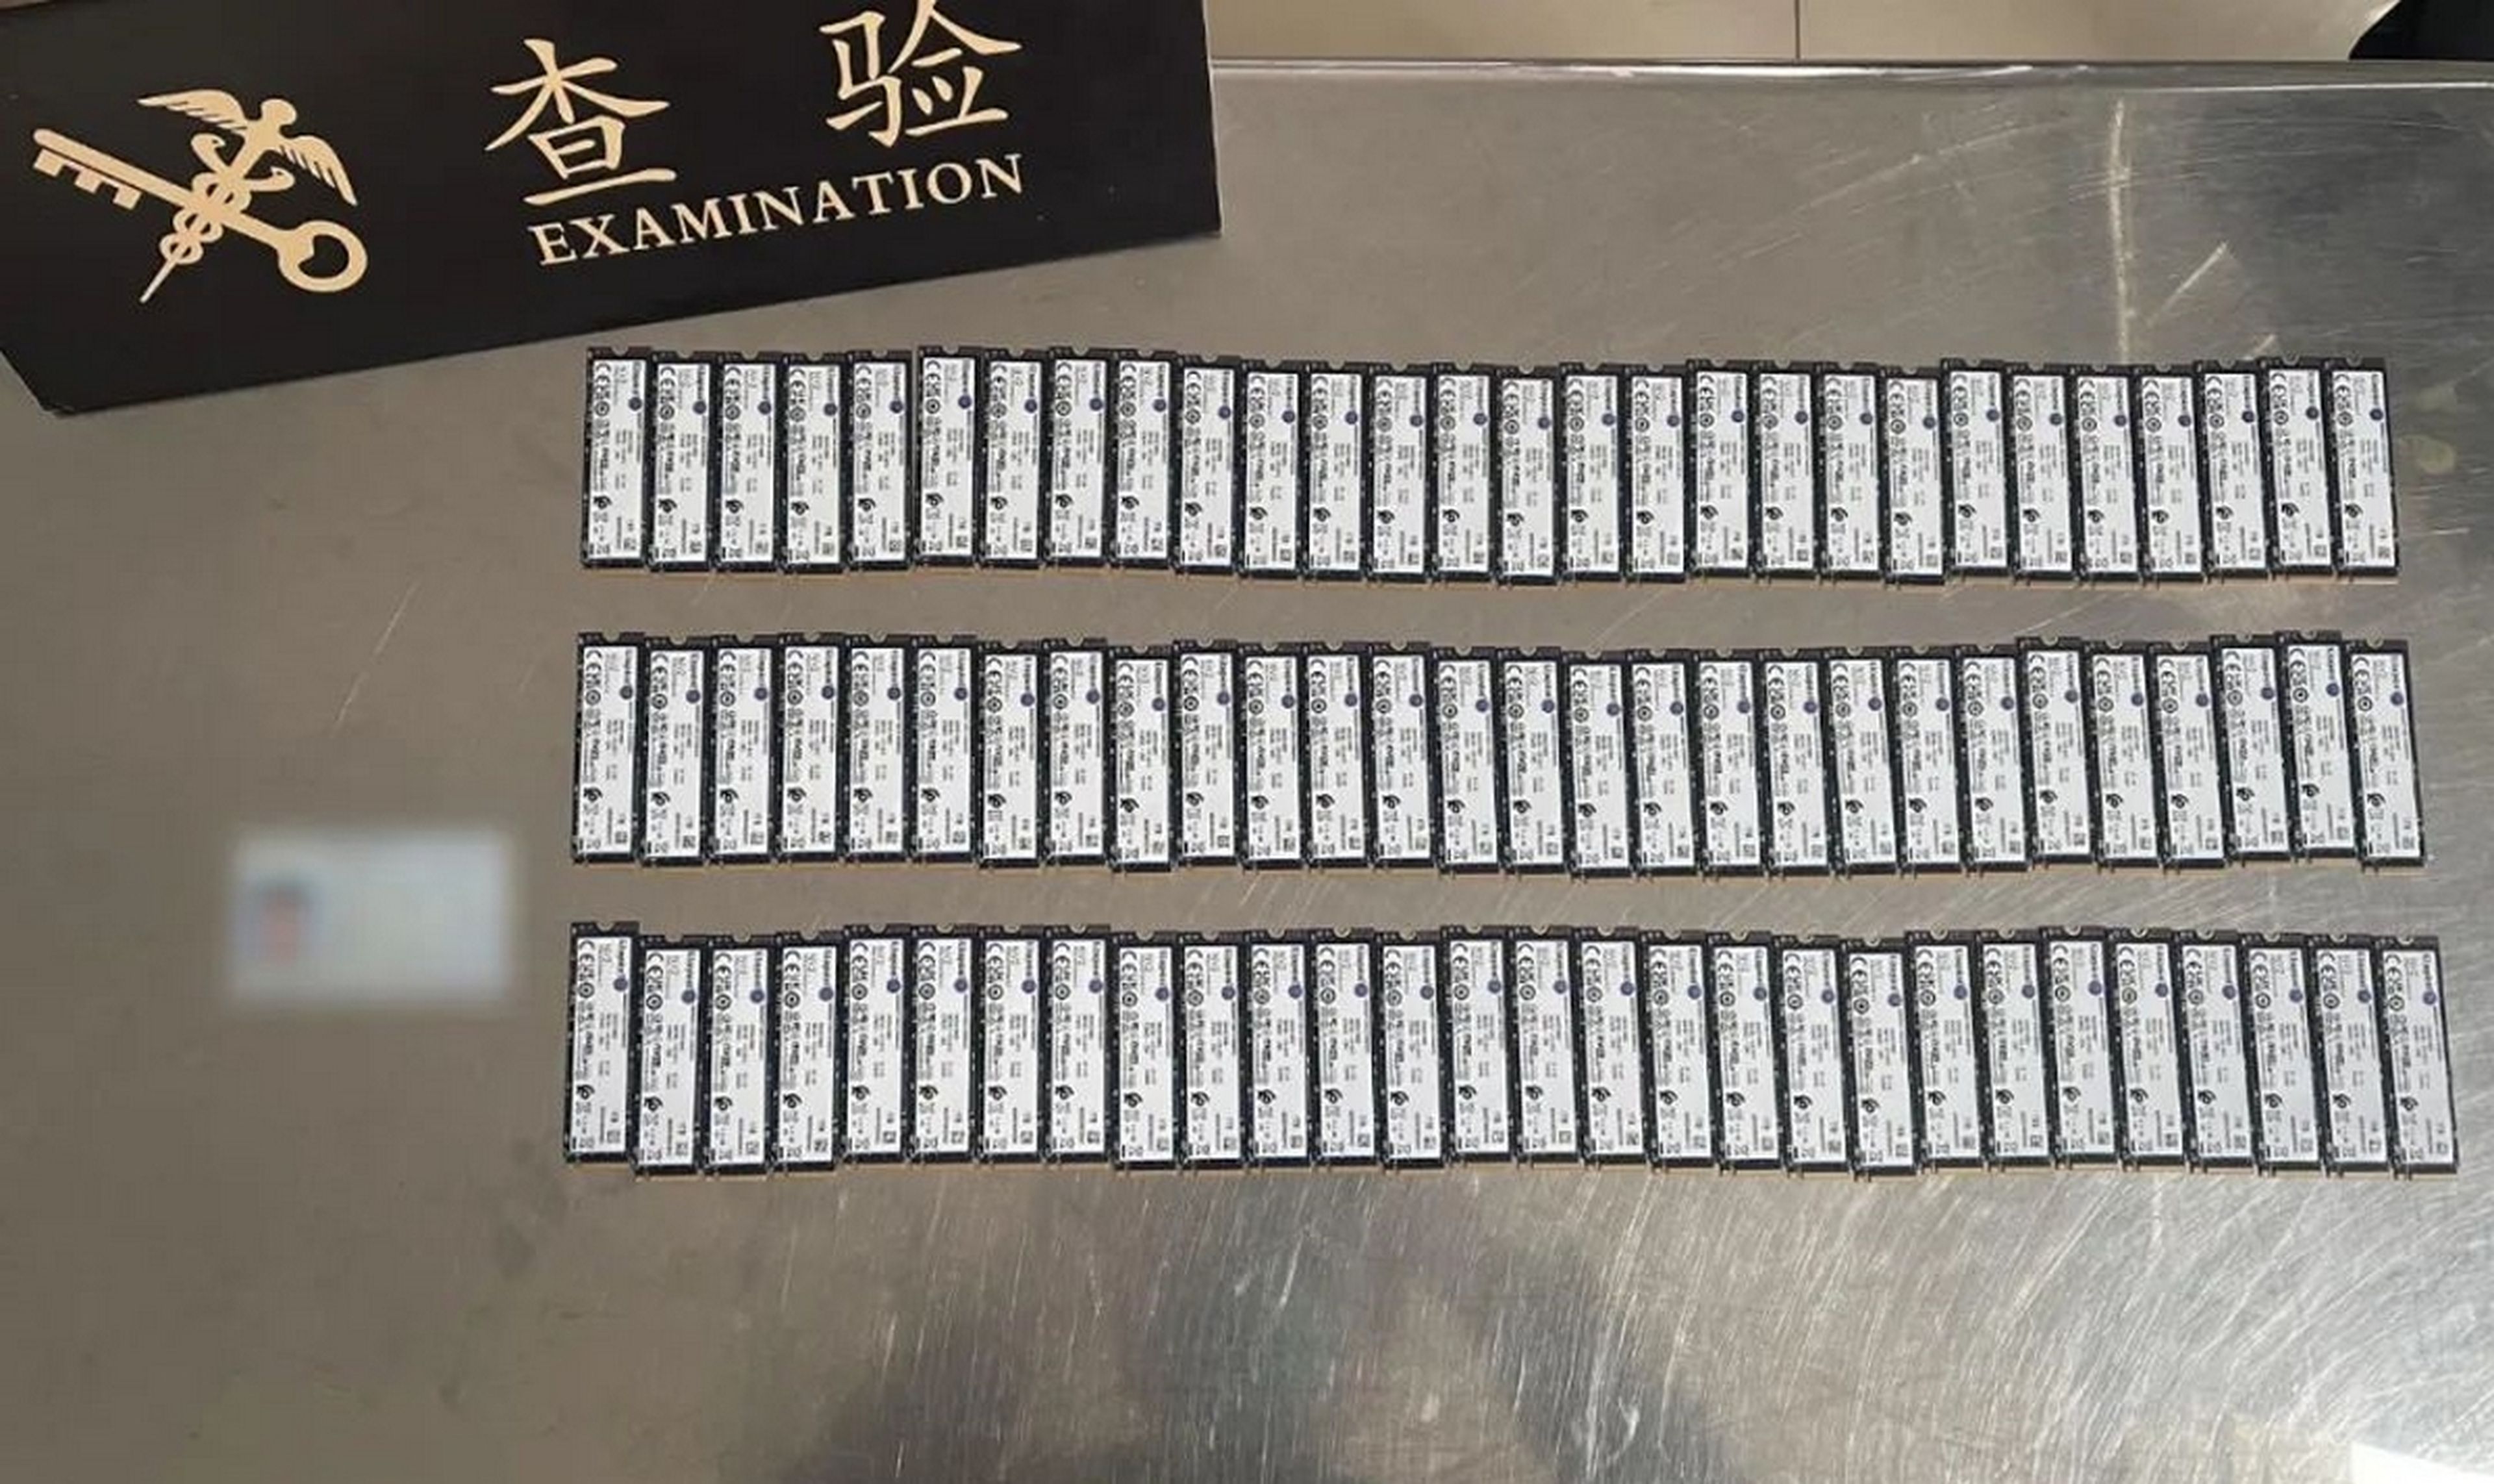 Arrested for trying to sneak 84 SSDs into an electric scooter through Chinese customs